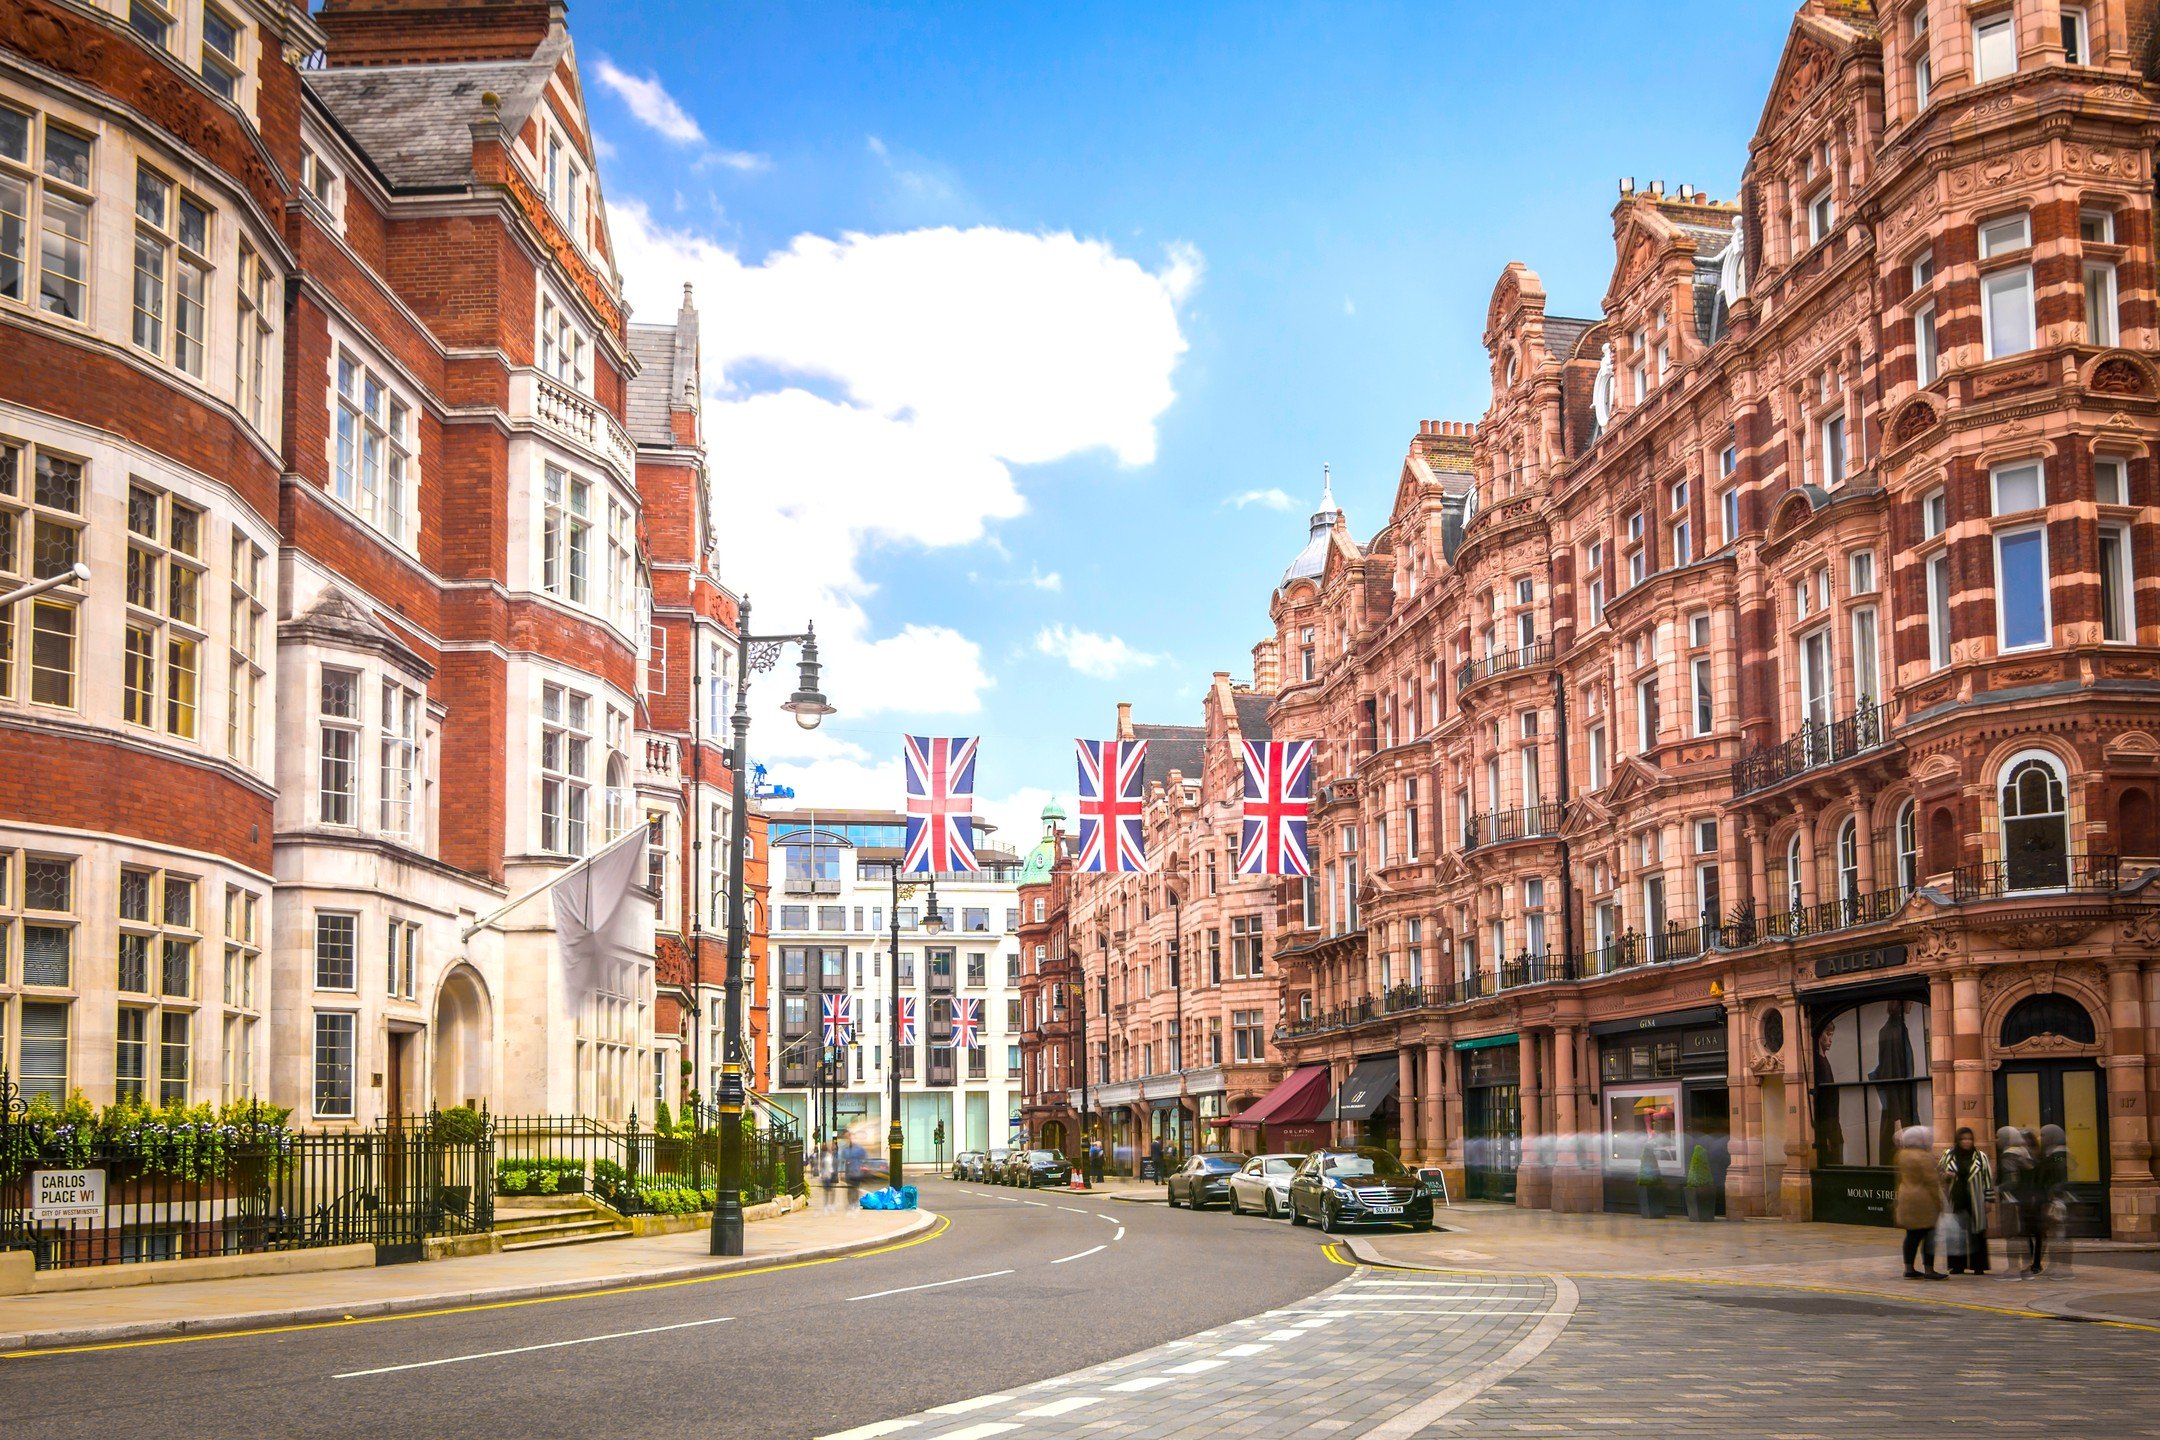 🇲🇨 Platinum Partner Trending Article - UK Prime Property: A Waking Giant - Barclays Private Bank Financial Insights

The UK prime property market is finally stirring from its slumber &ndash; with ripples of a cautious recovery spreading across the 